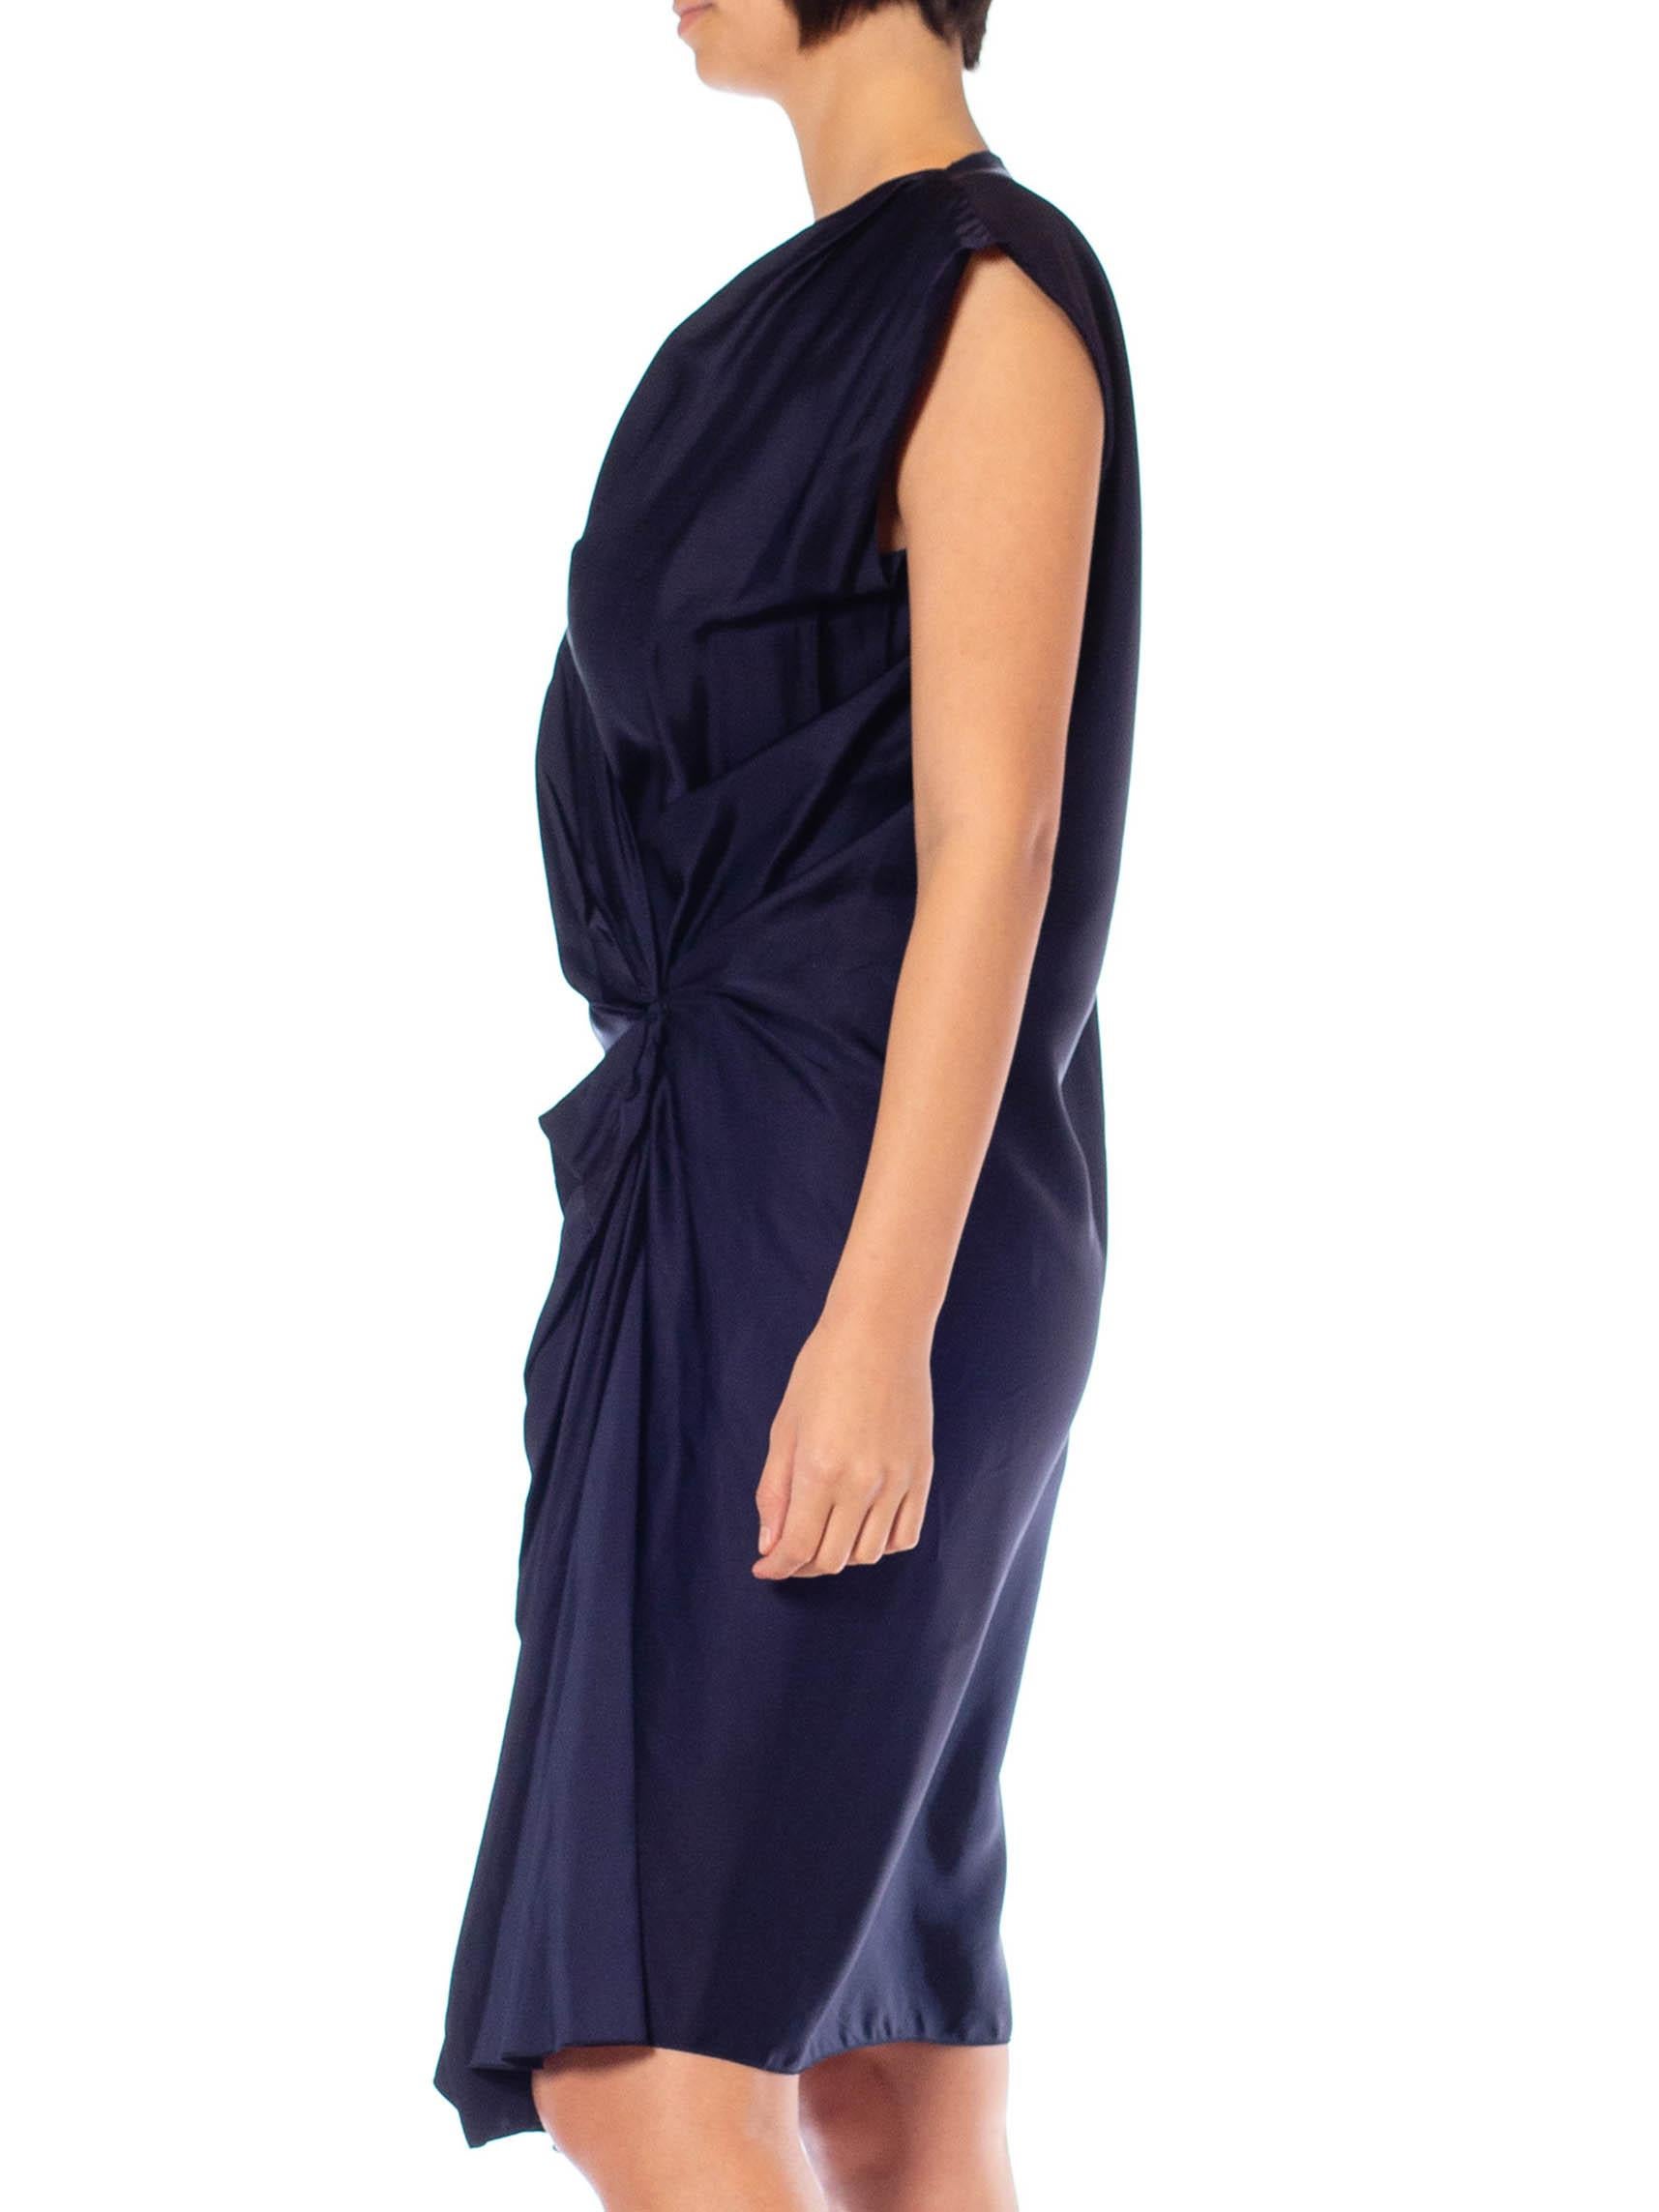 The raw deconstructed areas of this dress are part of the design and are not flaws 2000S Lanvin Navy Blue Silk Satin Deconstructed Wrap Dress 